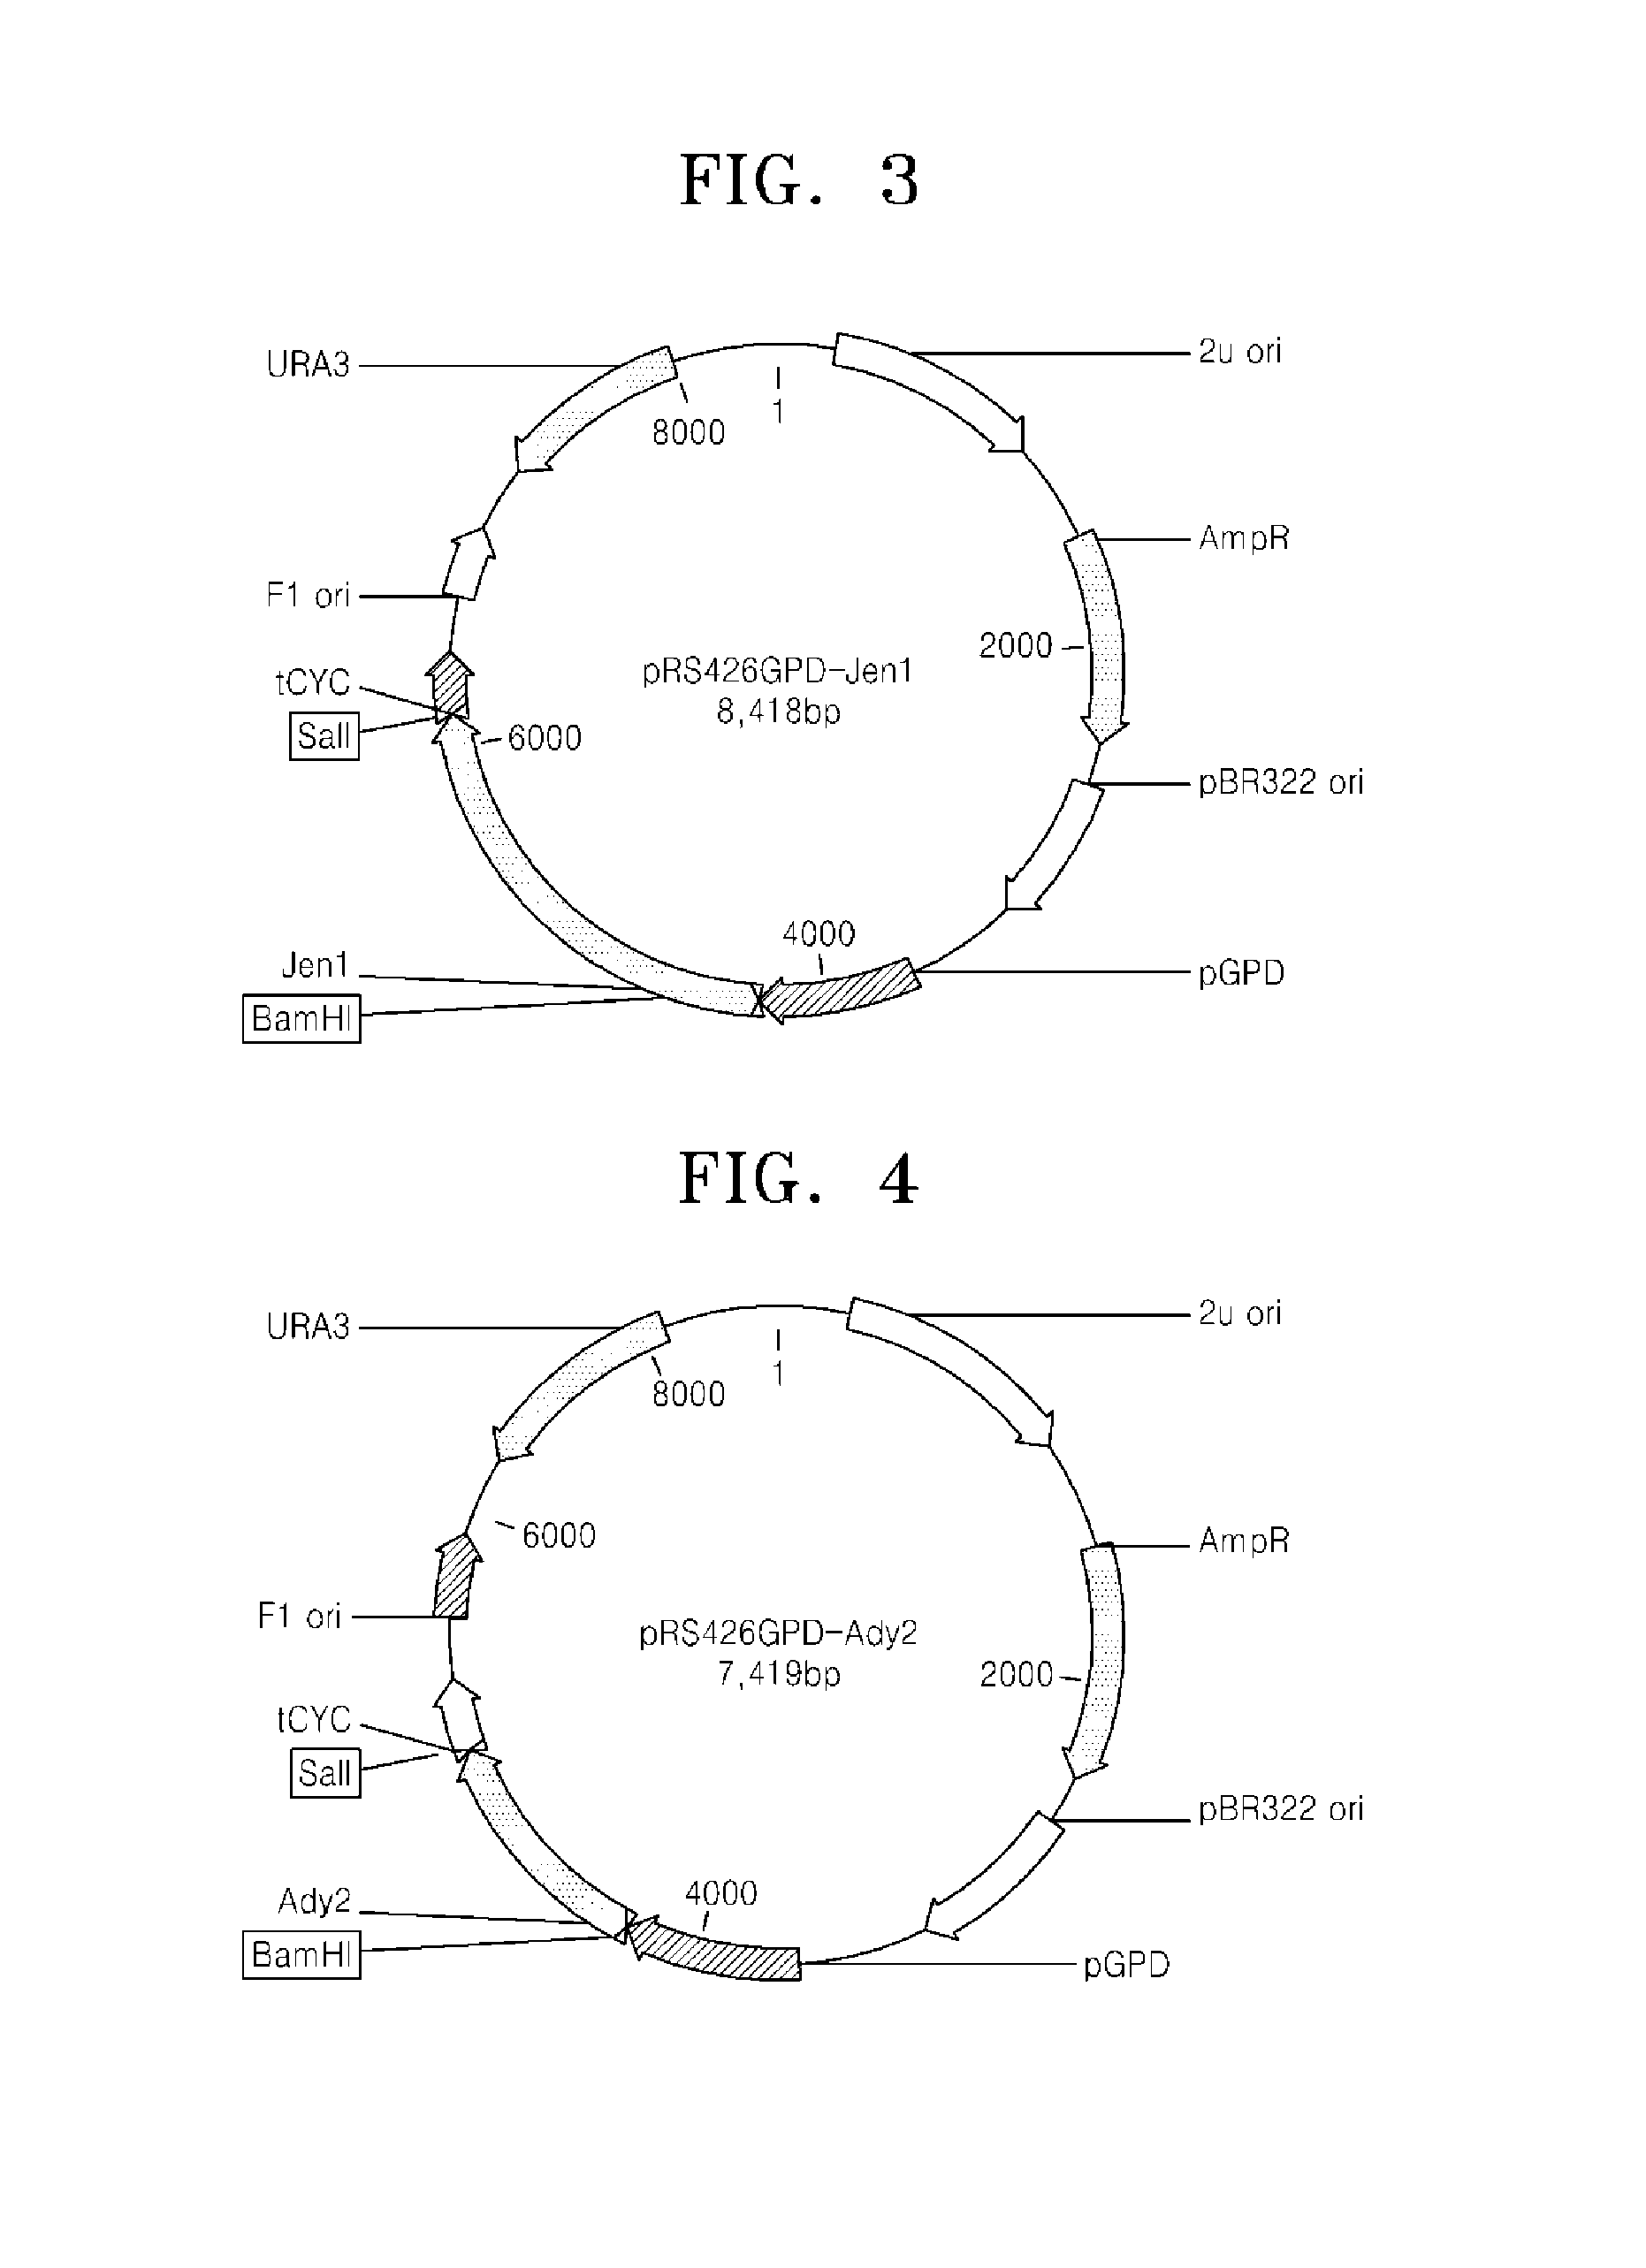 Microorganism over-expressing lactic acid transporter gene and having inhibitory pathway of lactic acid degradation, and method of producing lactic acid using the microorganism